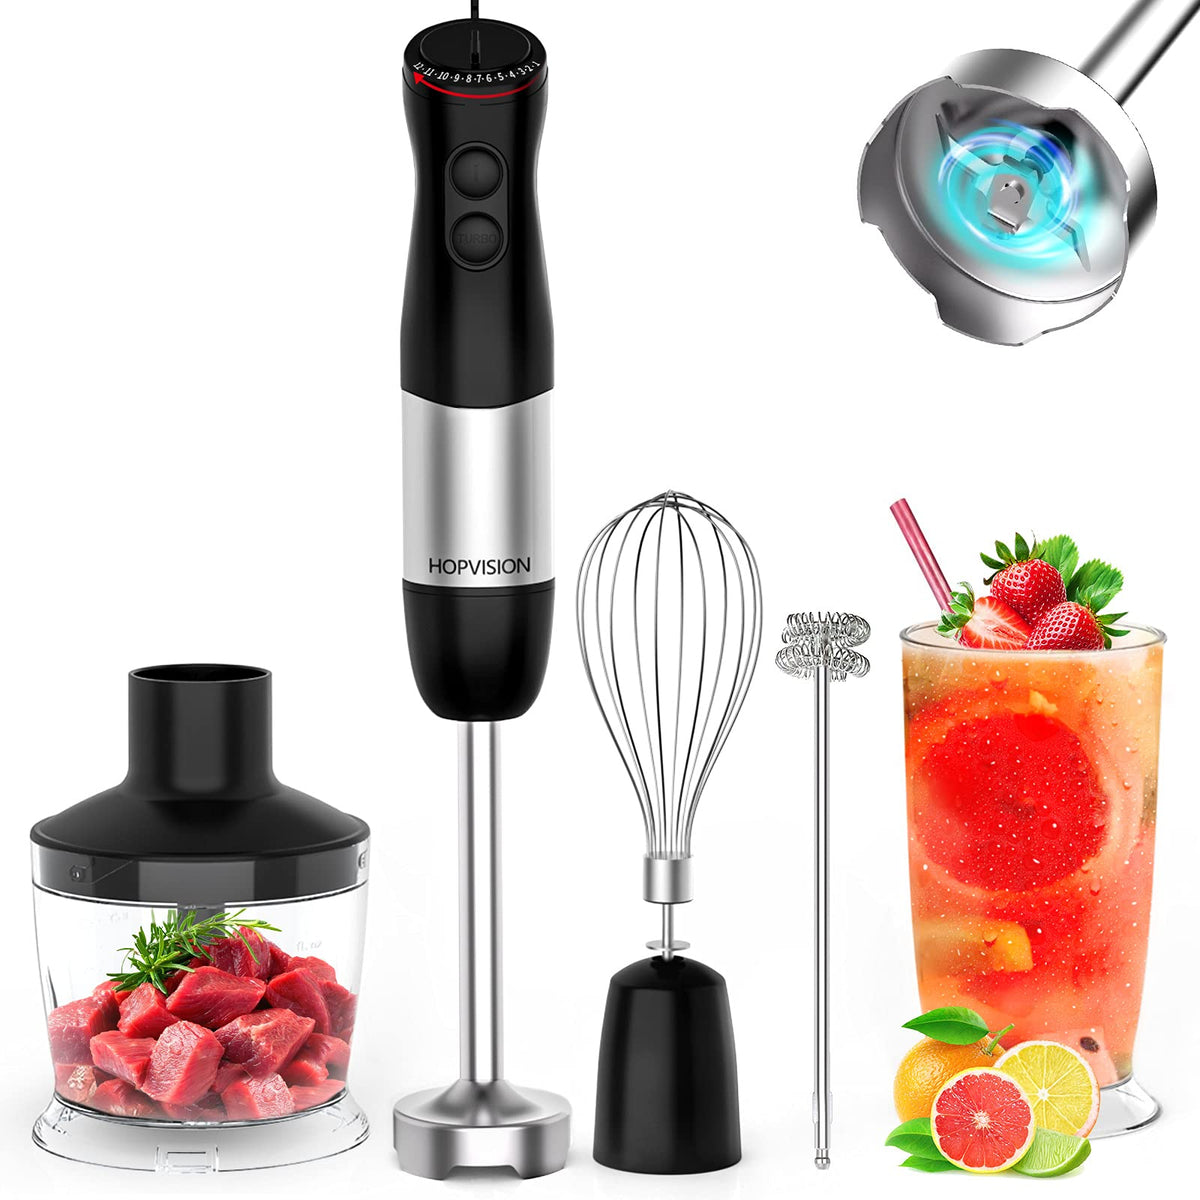 Vavsea 1000W 5-in-1 Immersion Hand Blender, 12 Speed Stick Blender with Mixing Beaker (22oz) 304 Stainless Steel with Chopper Bowl, Milk Frother, Egg